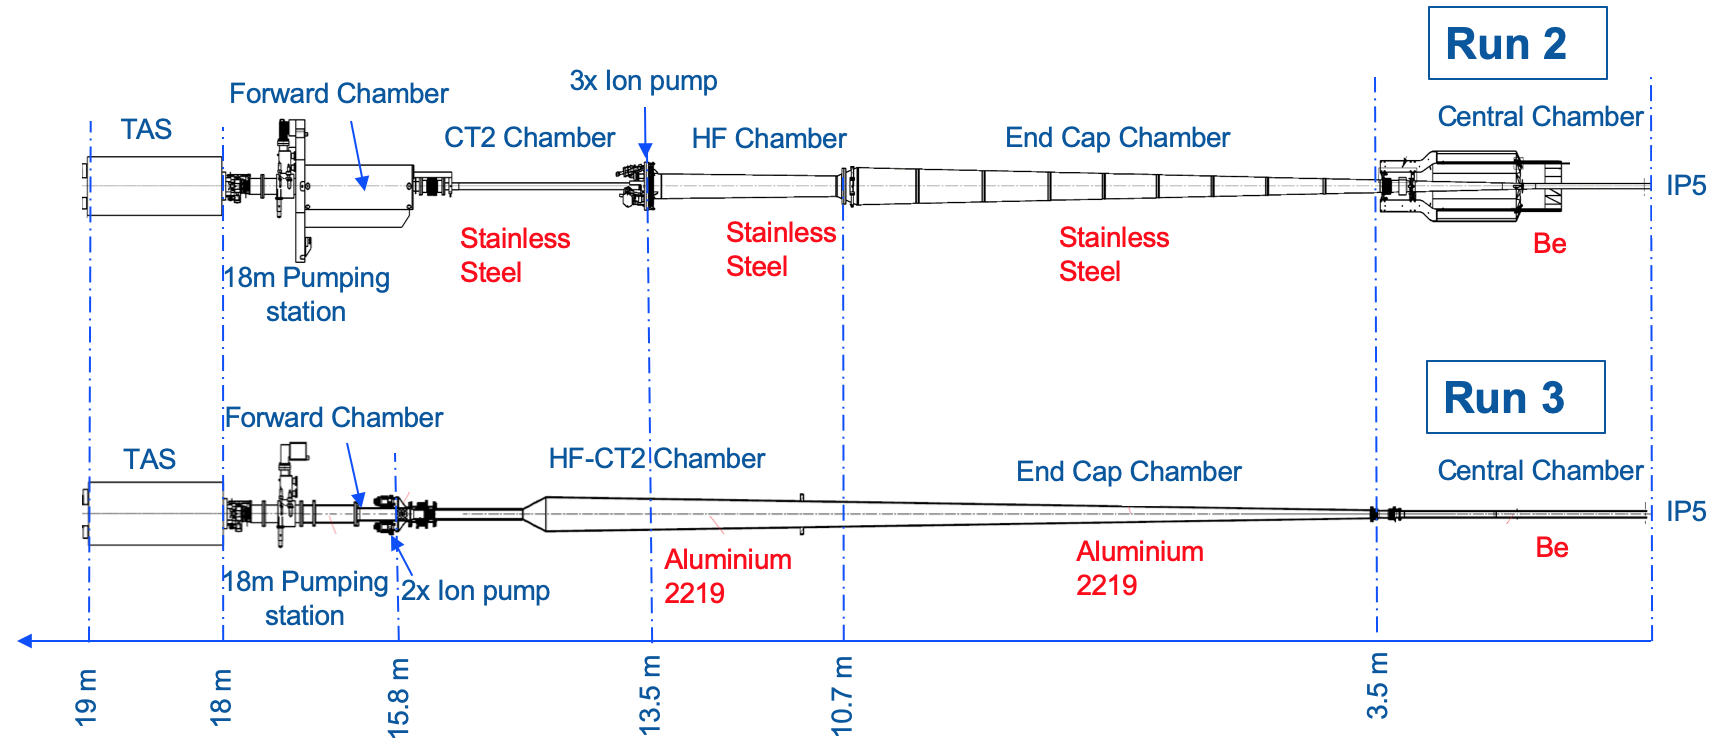 Figure 1-CMS experimental vacuum chamber layout during Run 2 and Run 3